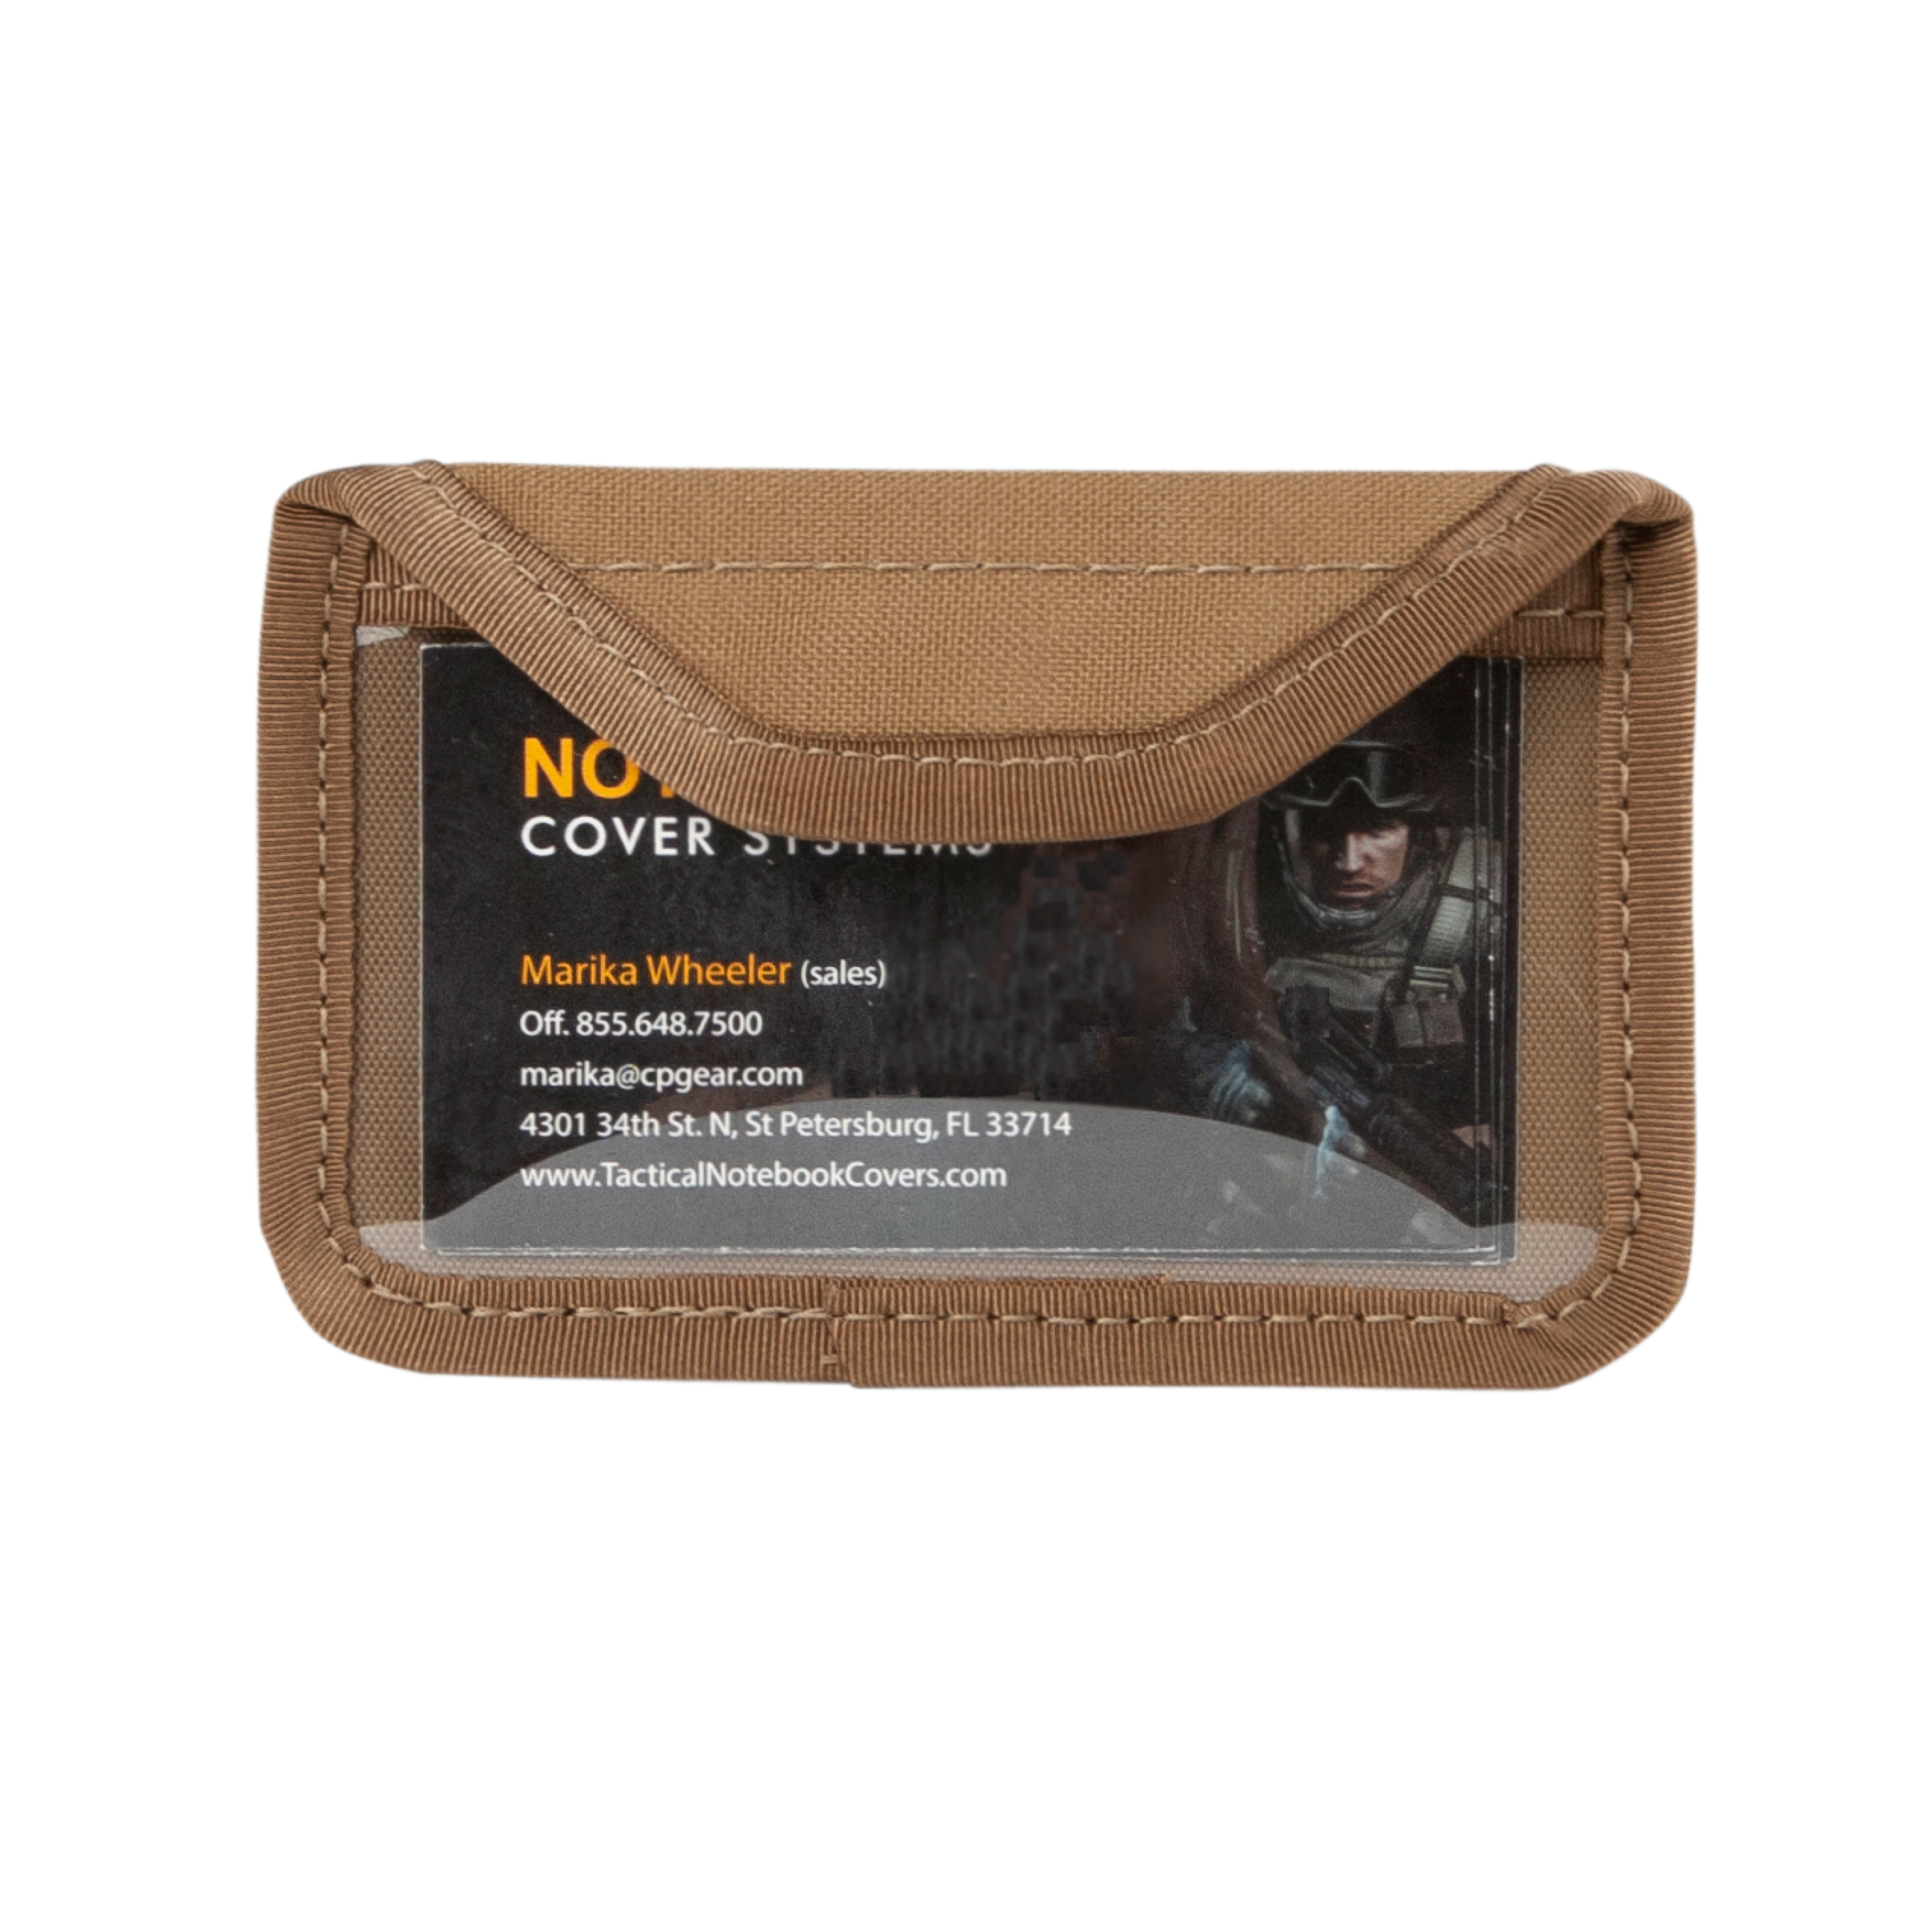 Detachable Business Card Pouch, See-Thru front – Tactical